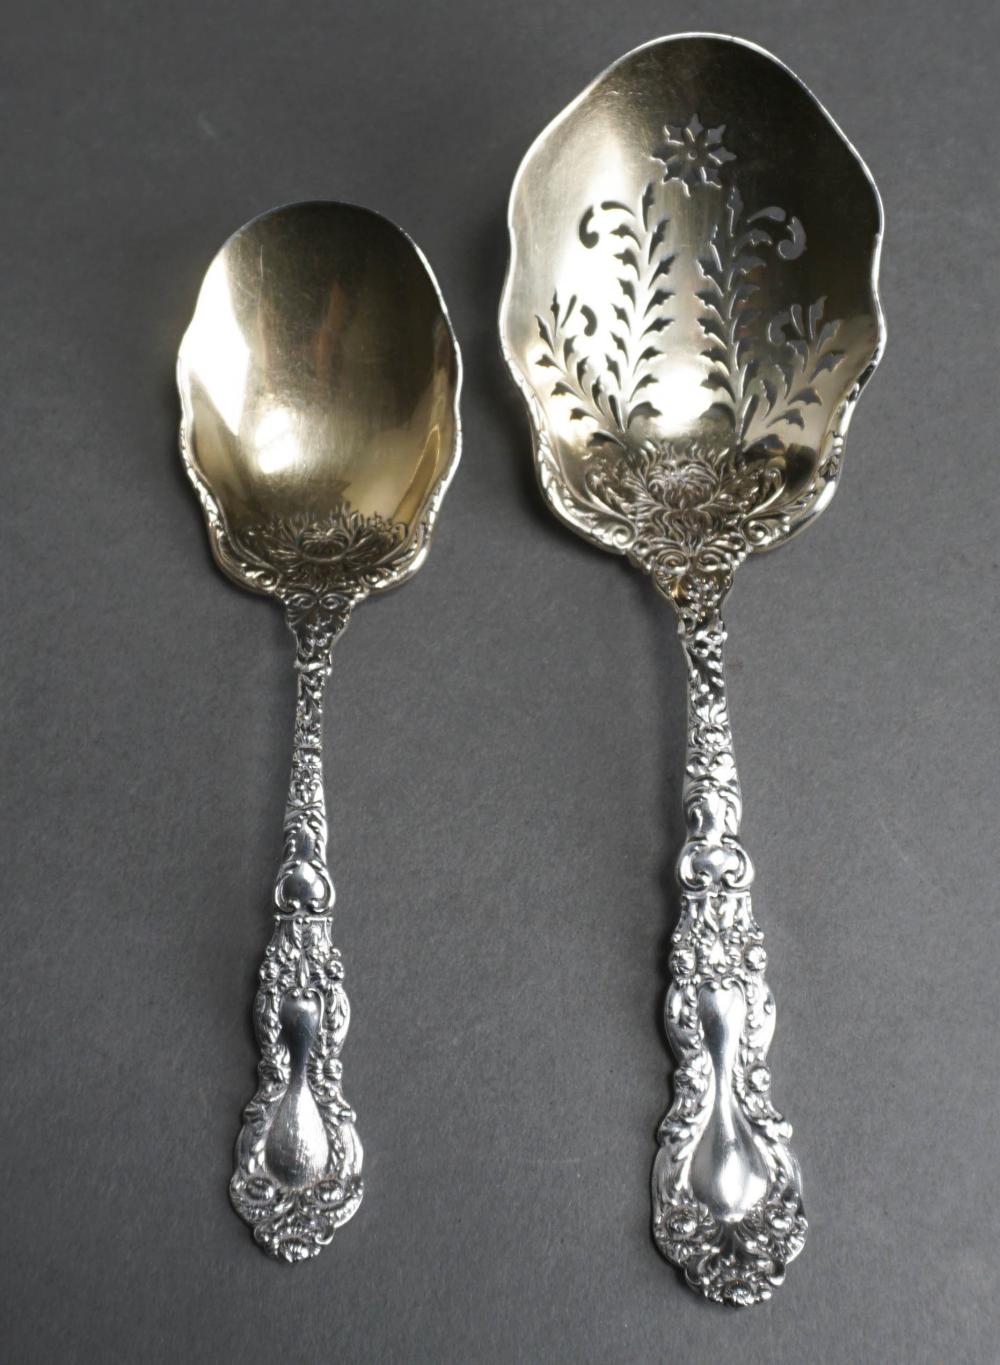 TWO GORHAM PARTIAL GILT STERLING